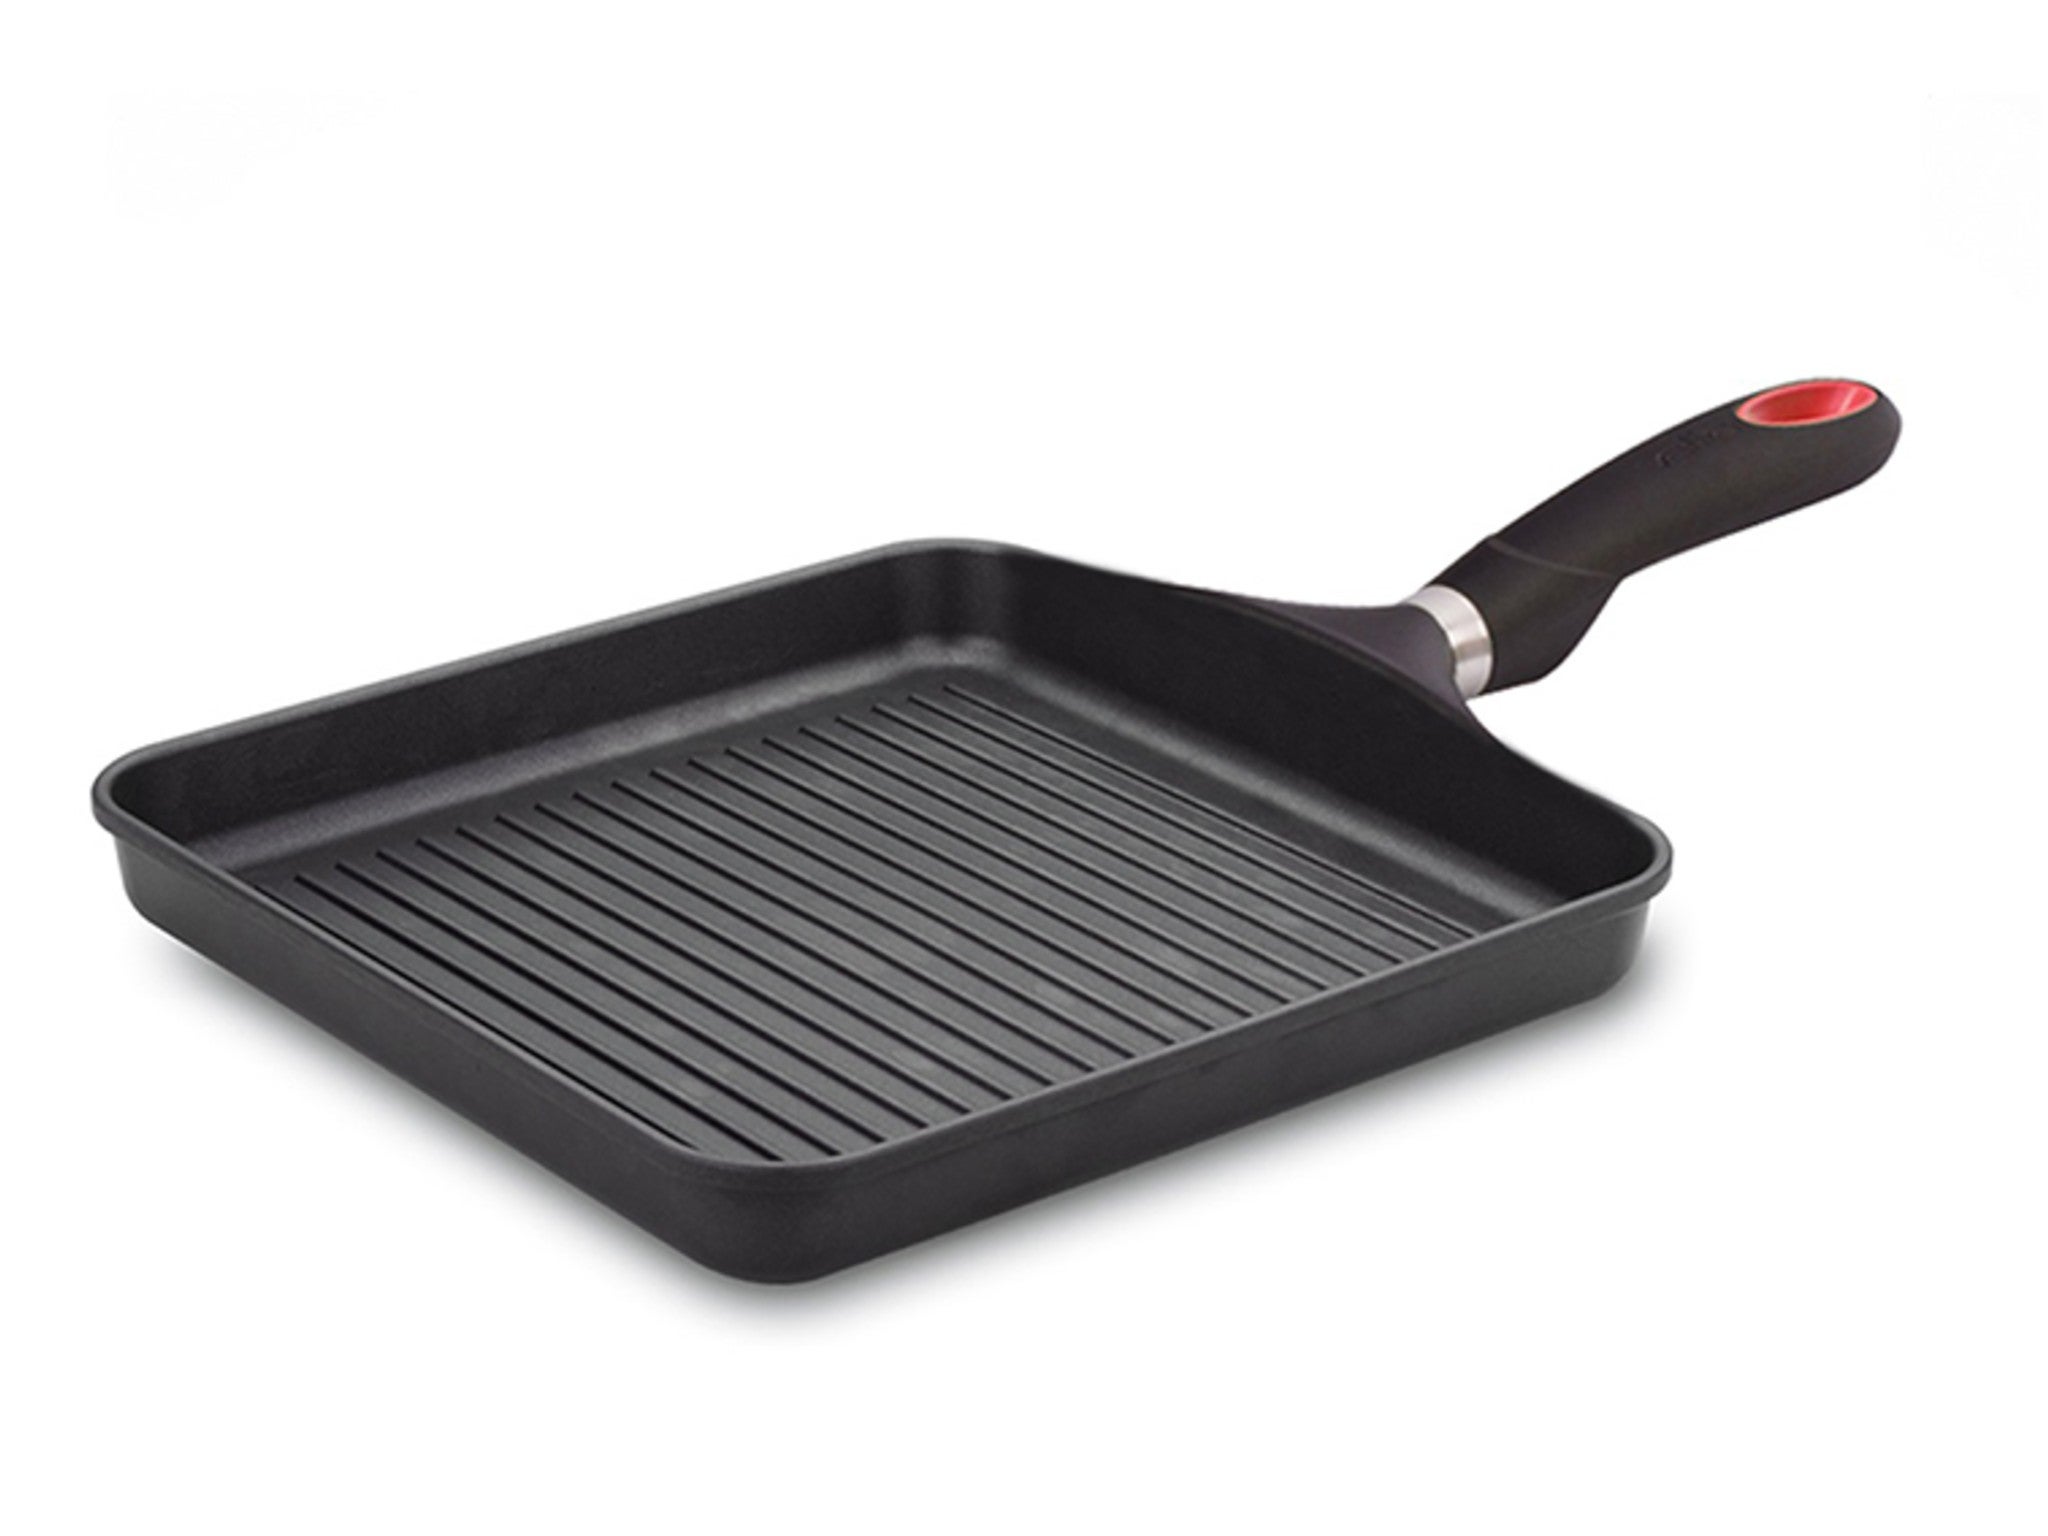 Professional Quality Kitchen Cooking Bake Trays Grill Plate,Flat Cast Iron Griddle Pan For Stove MANGGUO Nonstick Grill Pan,Durable Baking Tray for Outdoor 